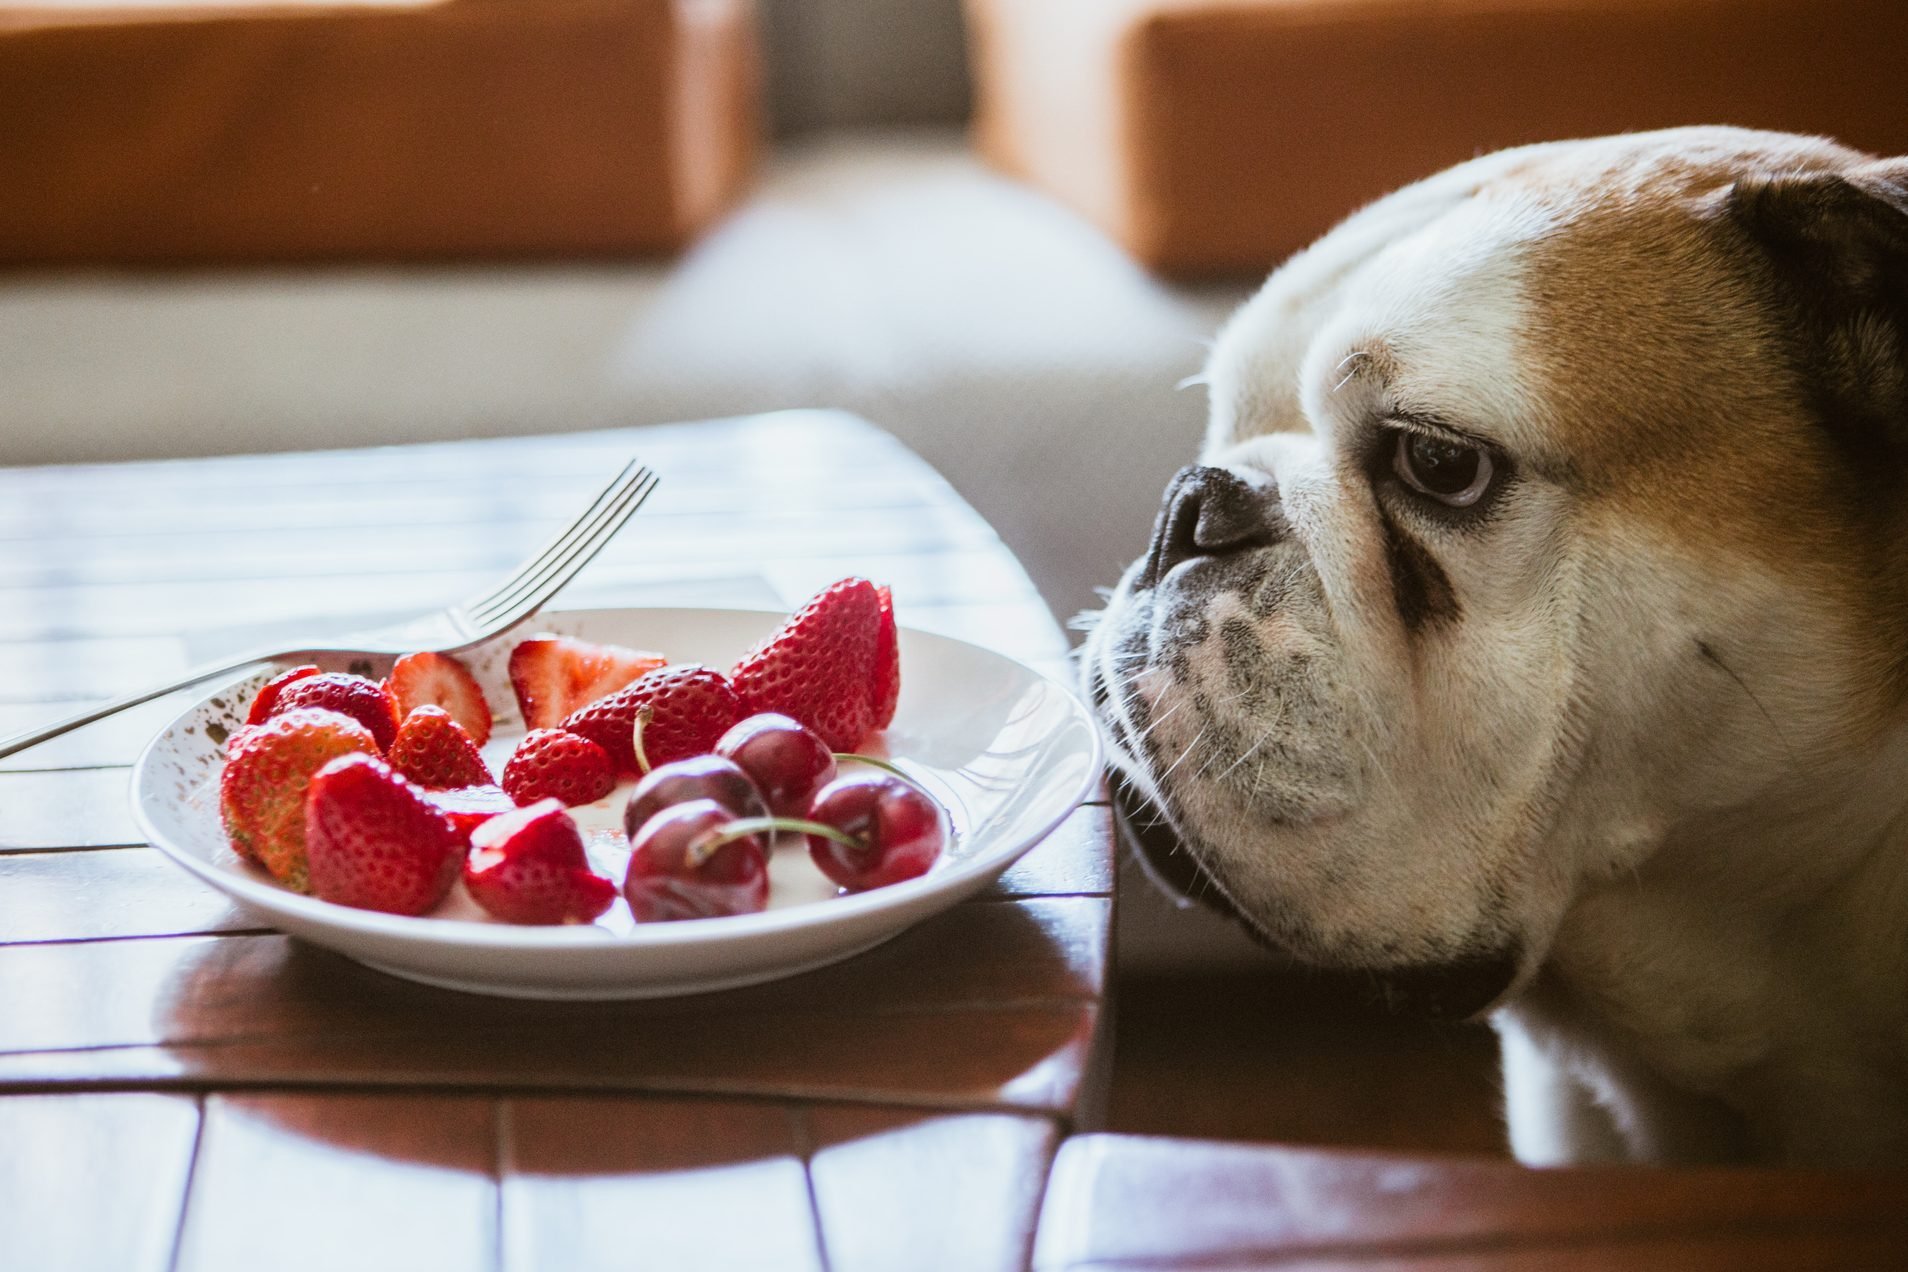 Can Dogs Eat Strawberries? Here's What Veterinarians Say